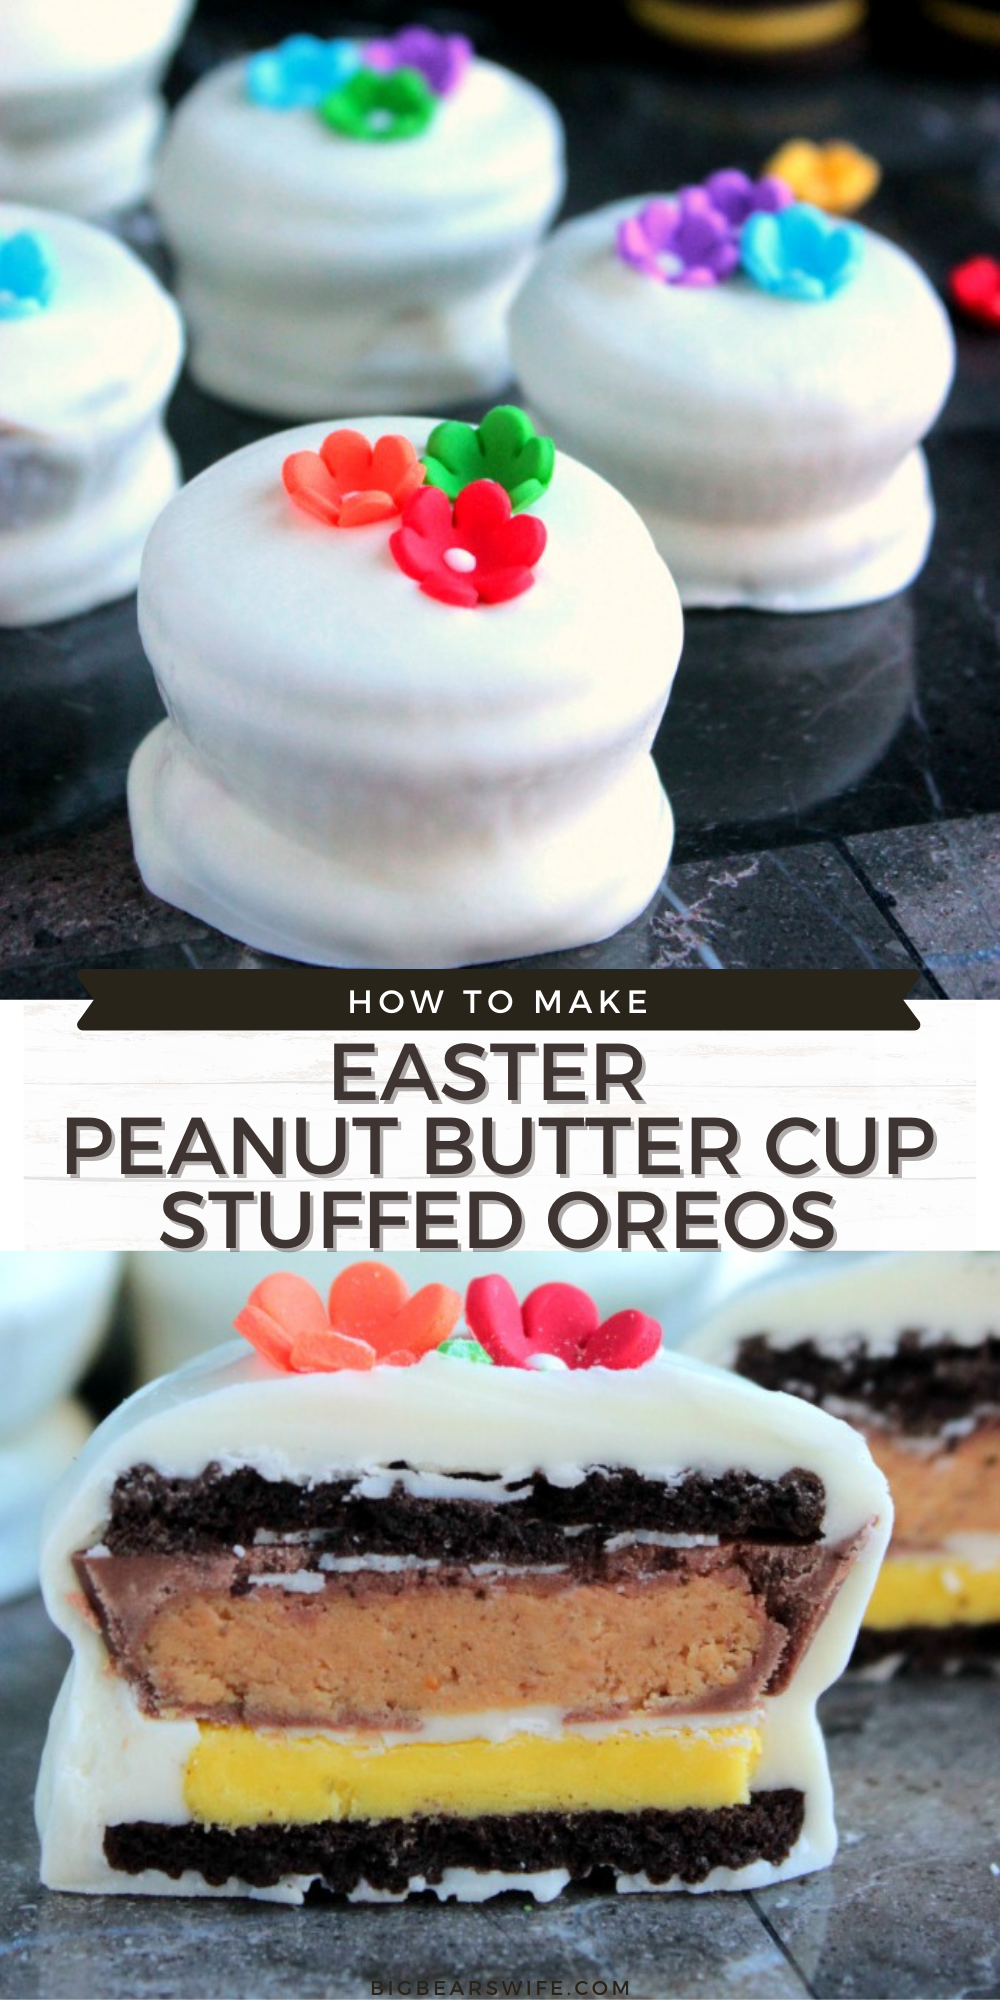 Springtime Easter Reese Stuffed Oreos have the sweetness from the chocolate, the crunch from the cookie and a creaminess from the peanut butter! Topped with little sugar flowers, they're just perfect for Easter and Spring! via @bigbearswife